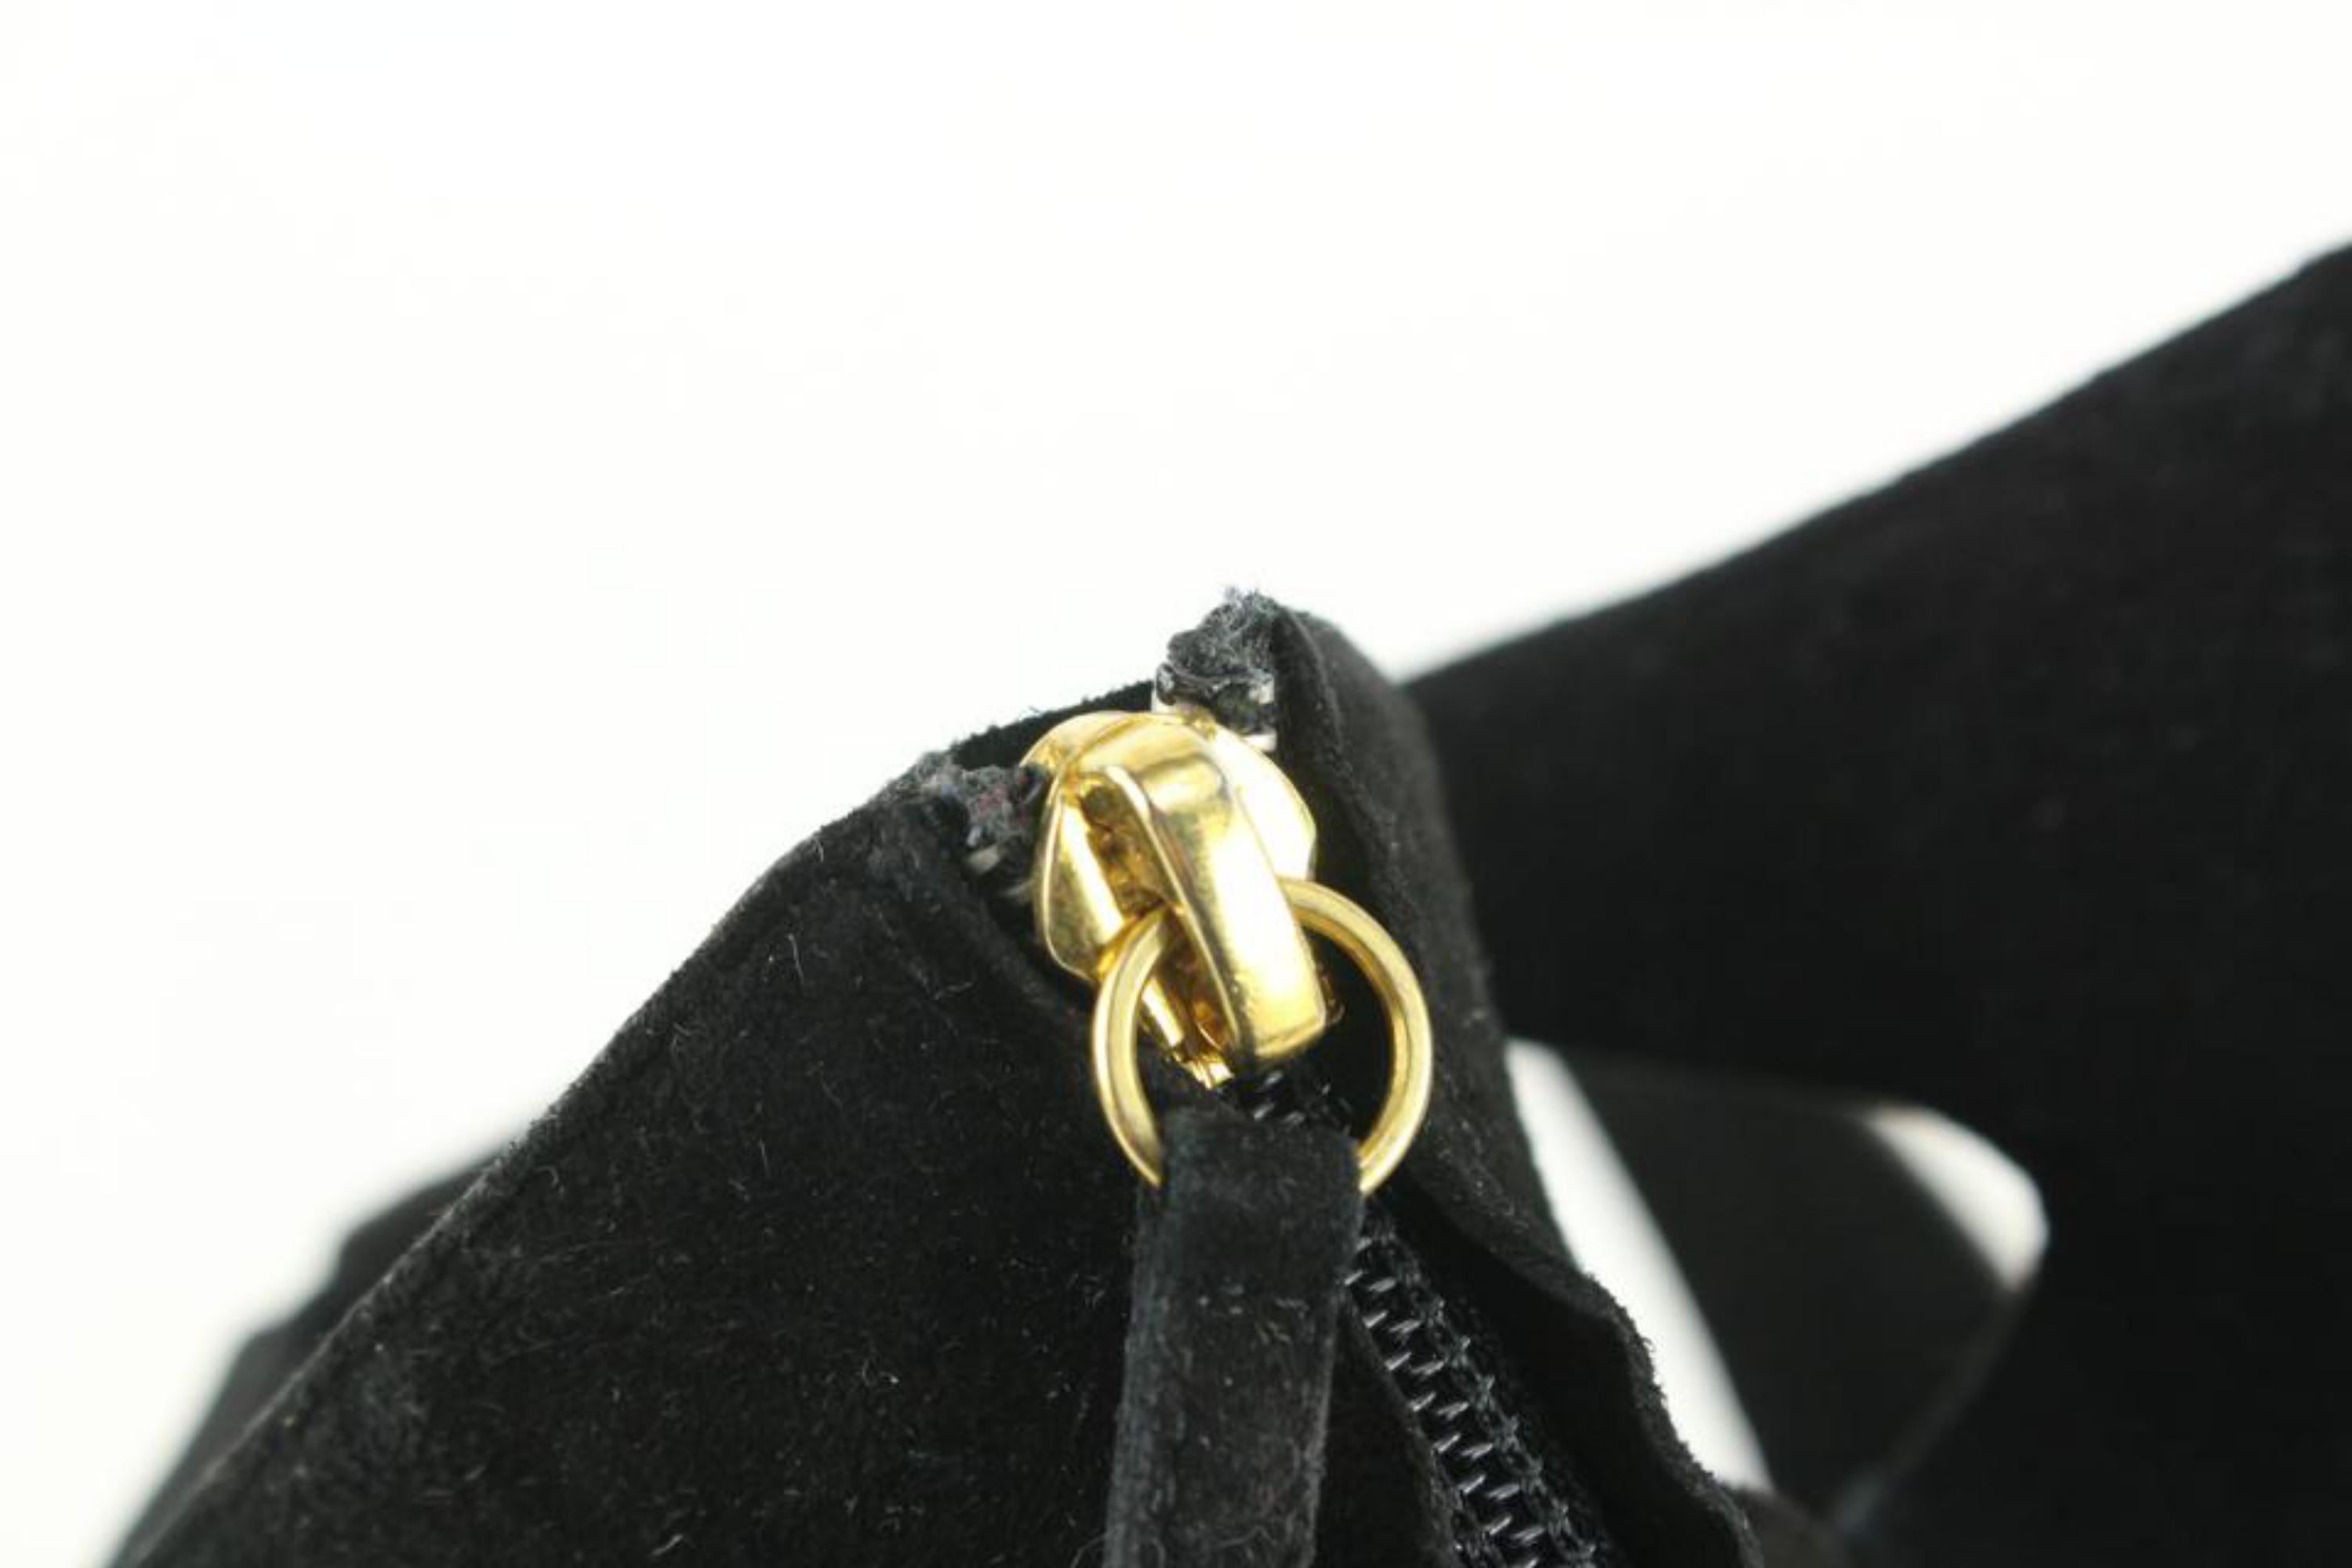 Giuseppe Zanotti Women's 35.5 Black x Grey Suede Cannella No Heel Platforms  In Good Condition For Sale In Dix hills, NY